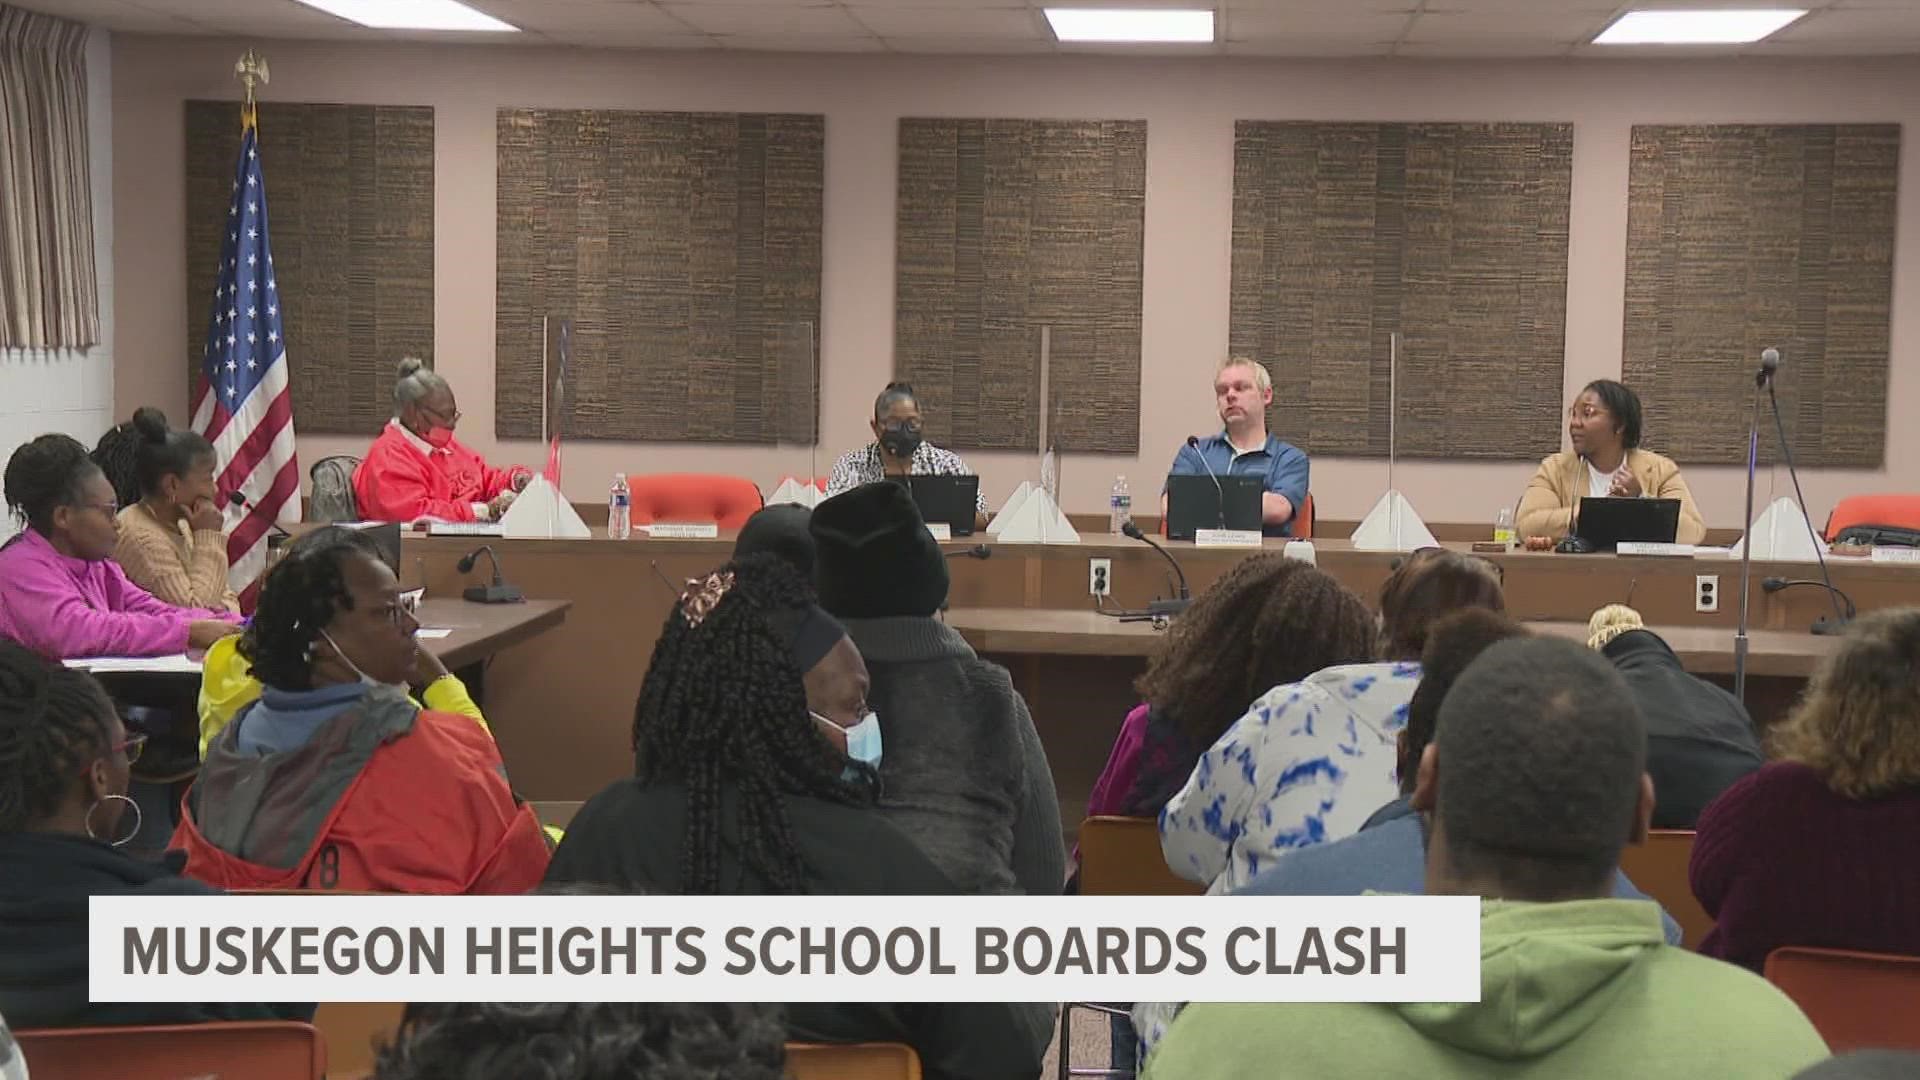 For the second night in a row, it was standing room only as Muskegon Heights school leaders met to discuss ongoing complaints in the district.